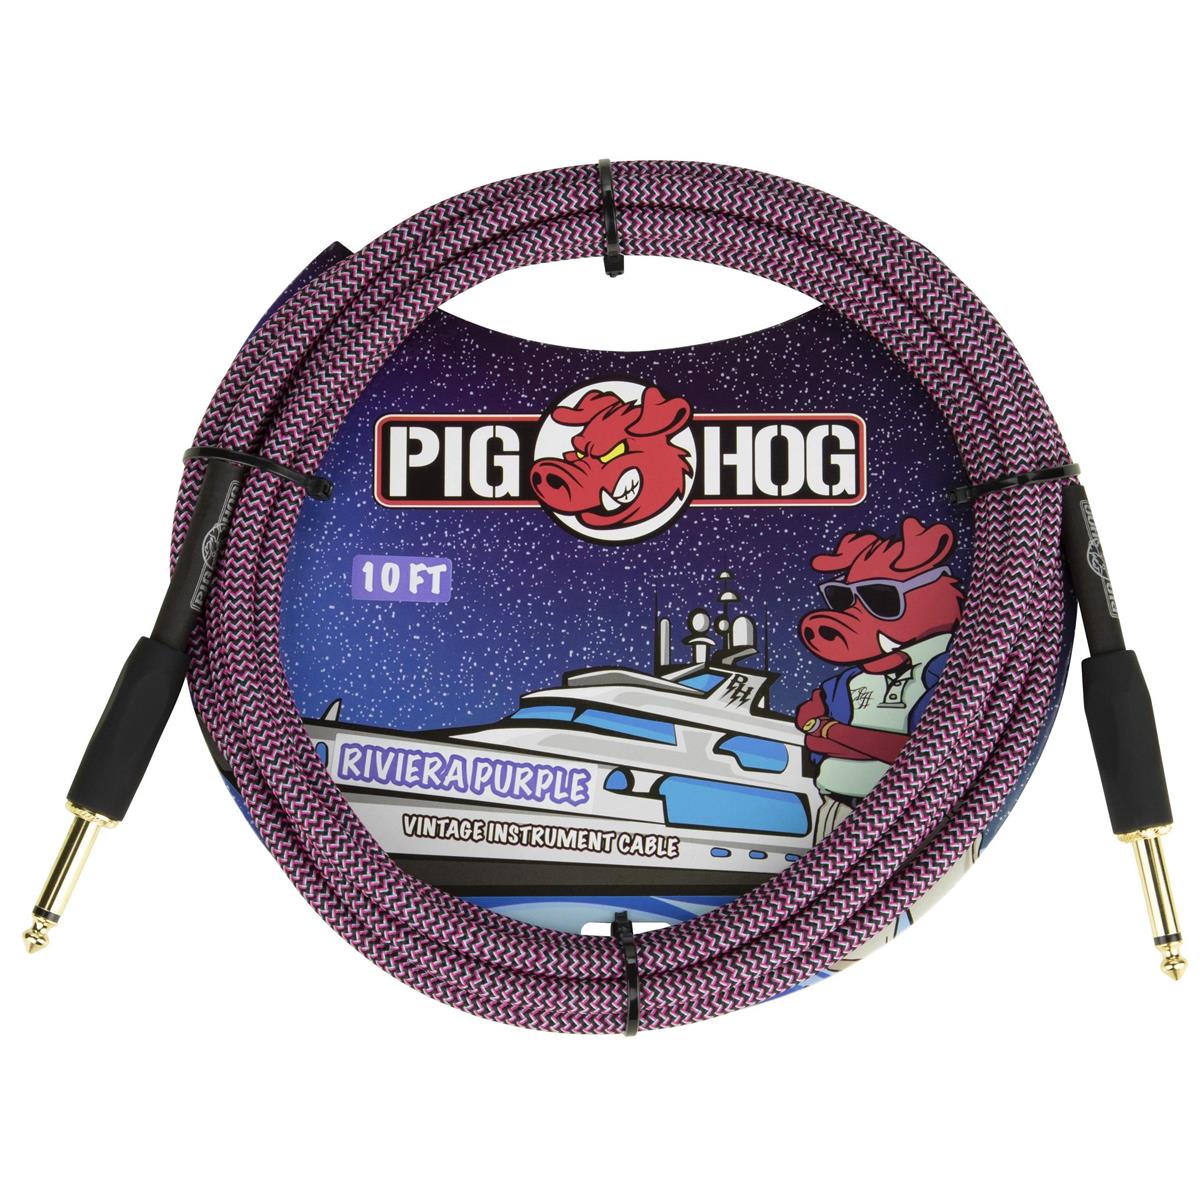 Image of Pig Hog 'Riviera Purple' Instrument Cable